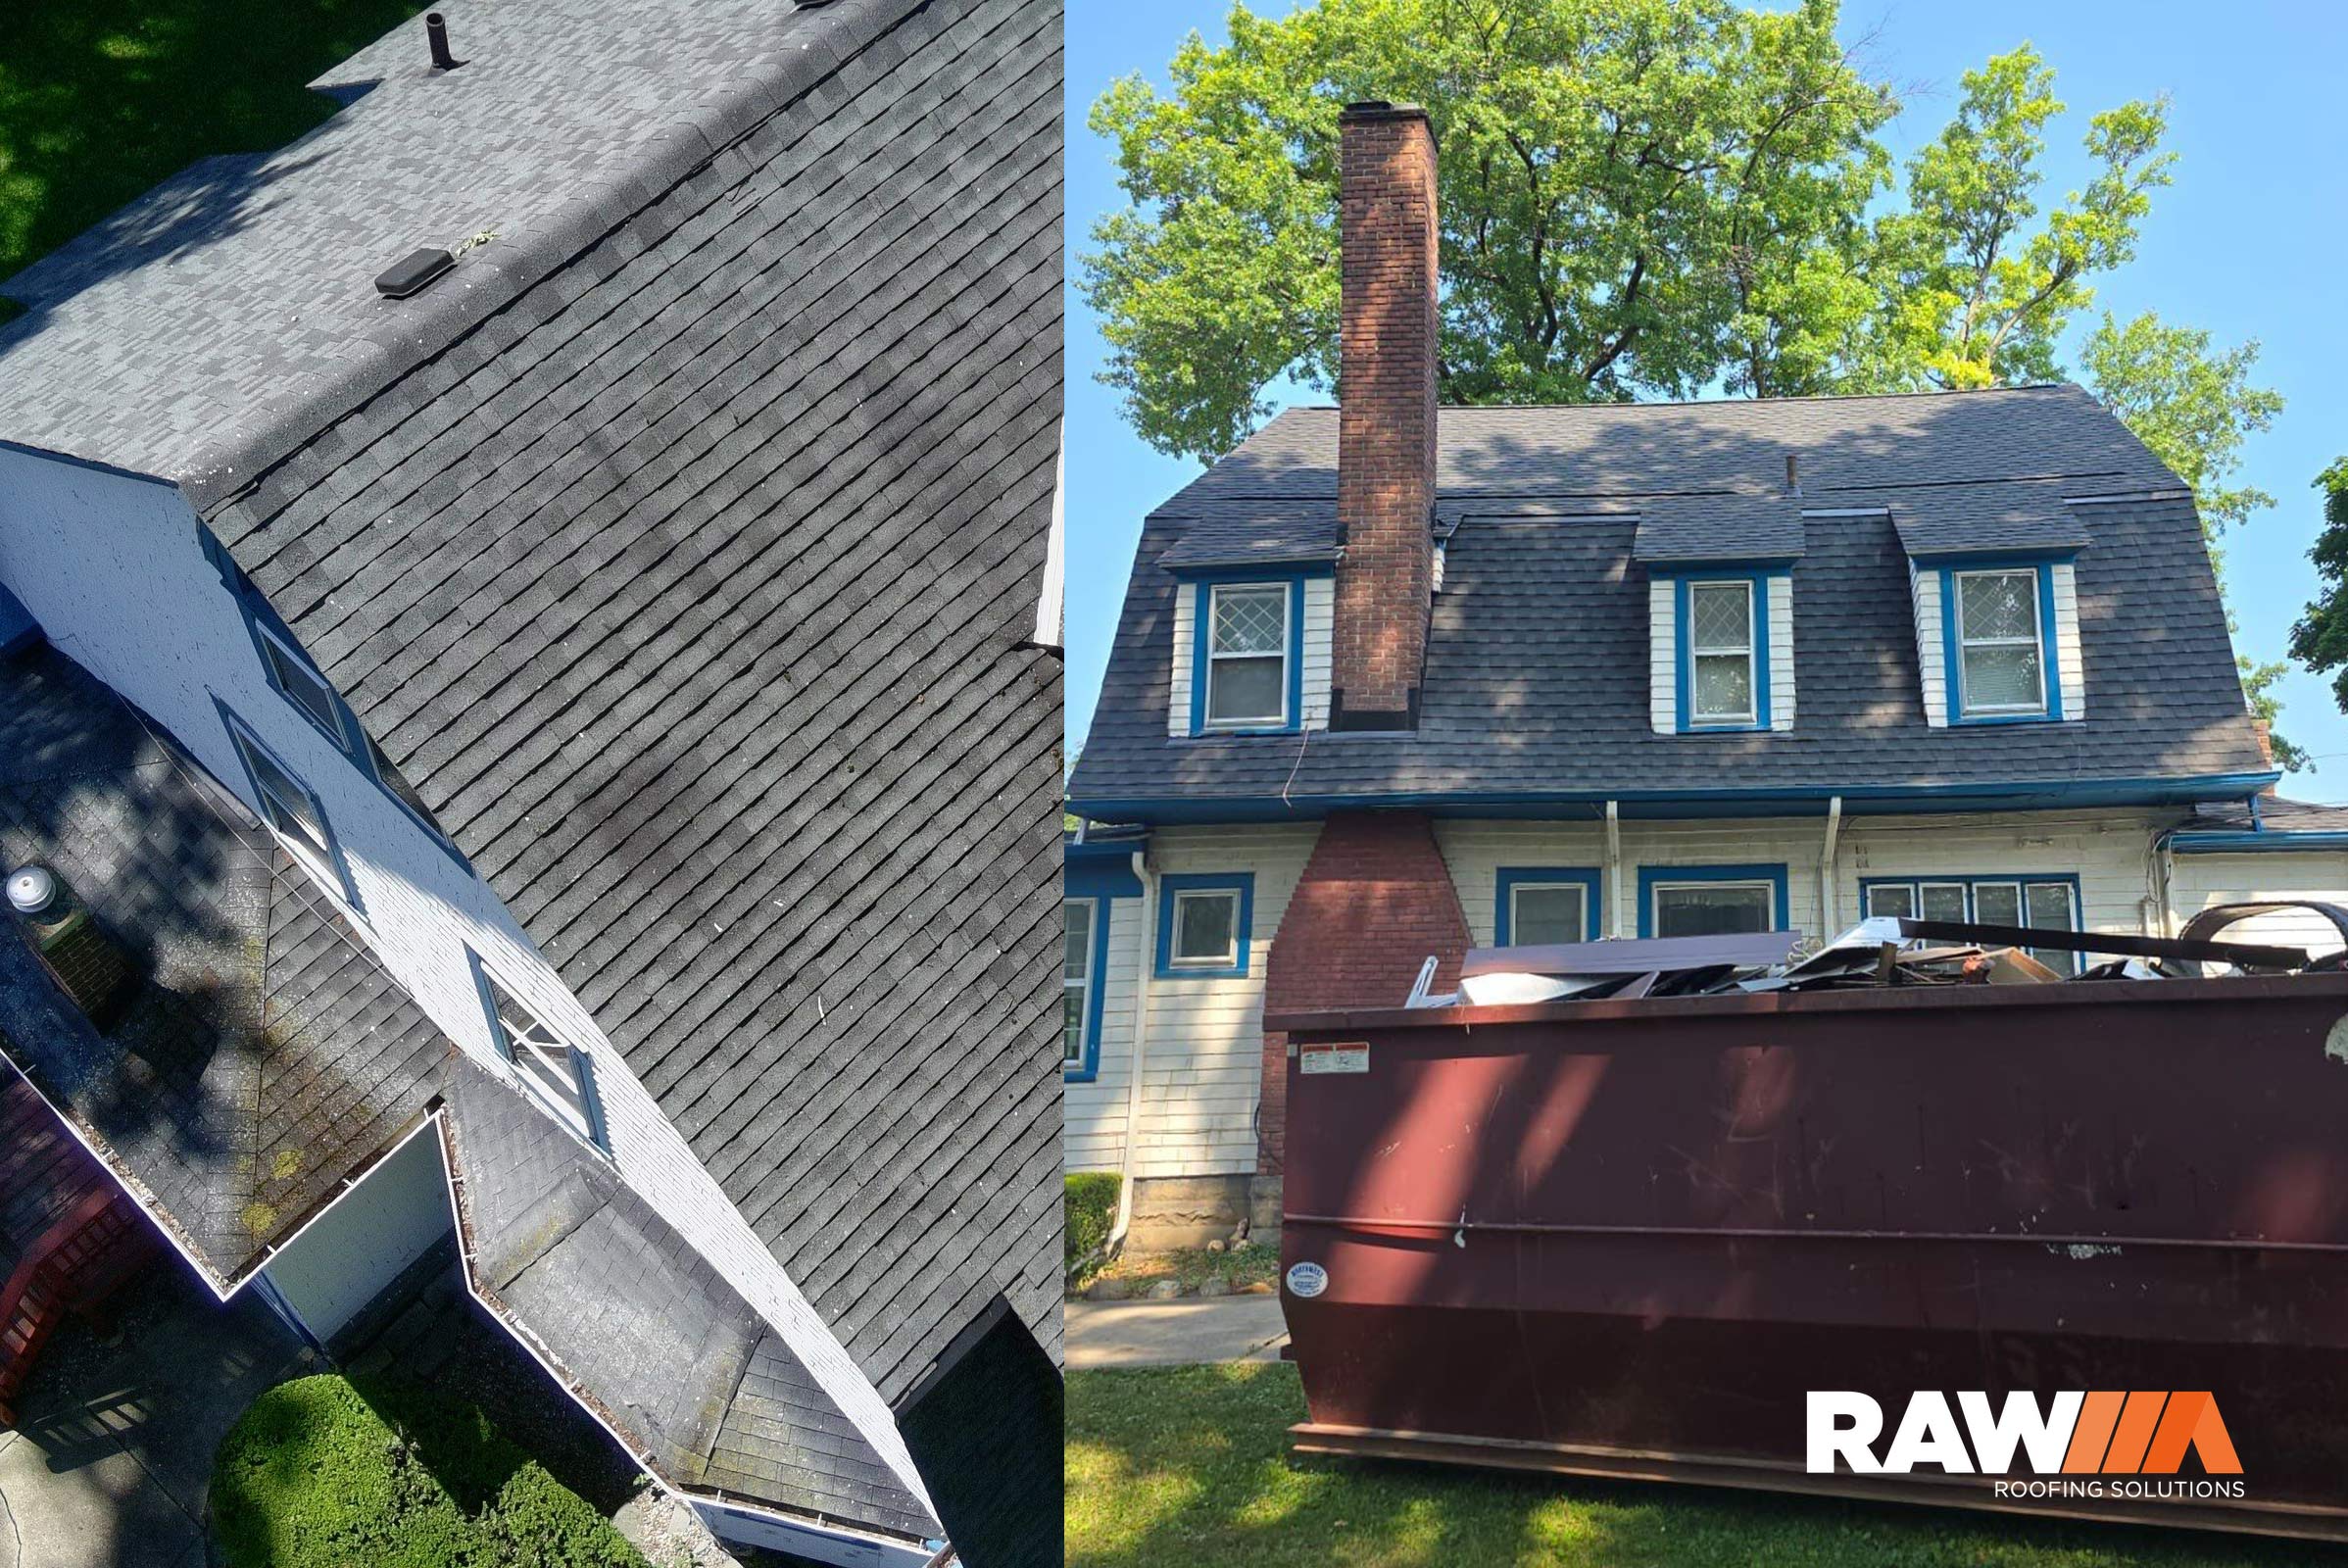 RAW Roofing Solutions before and after